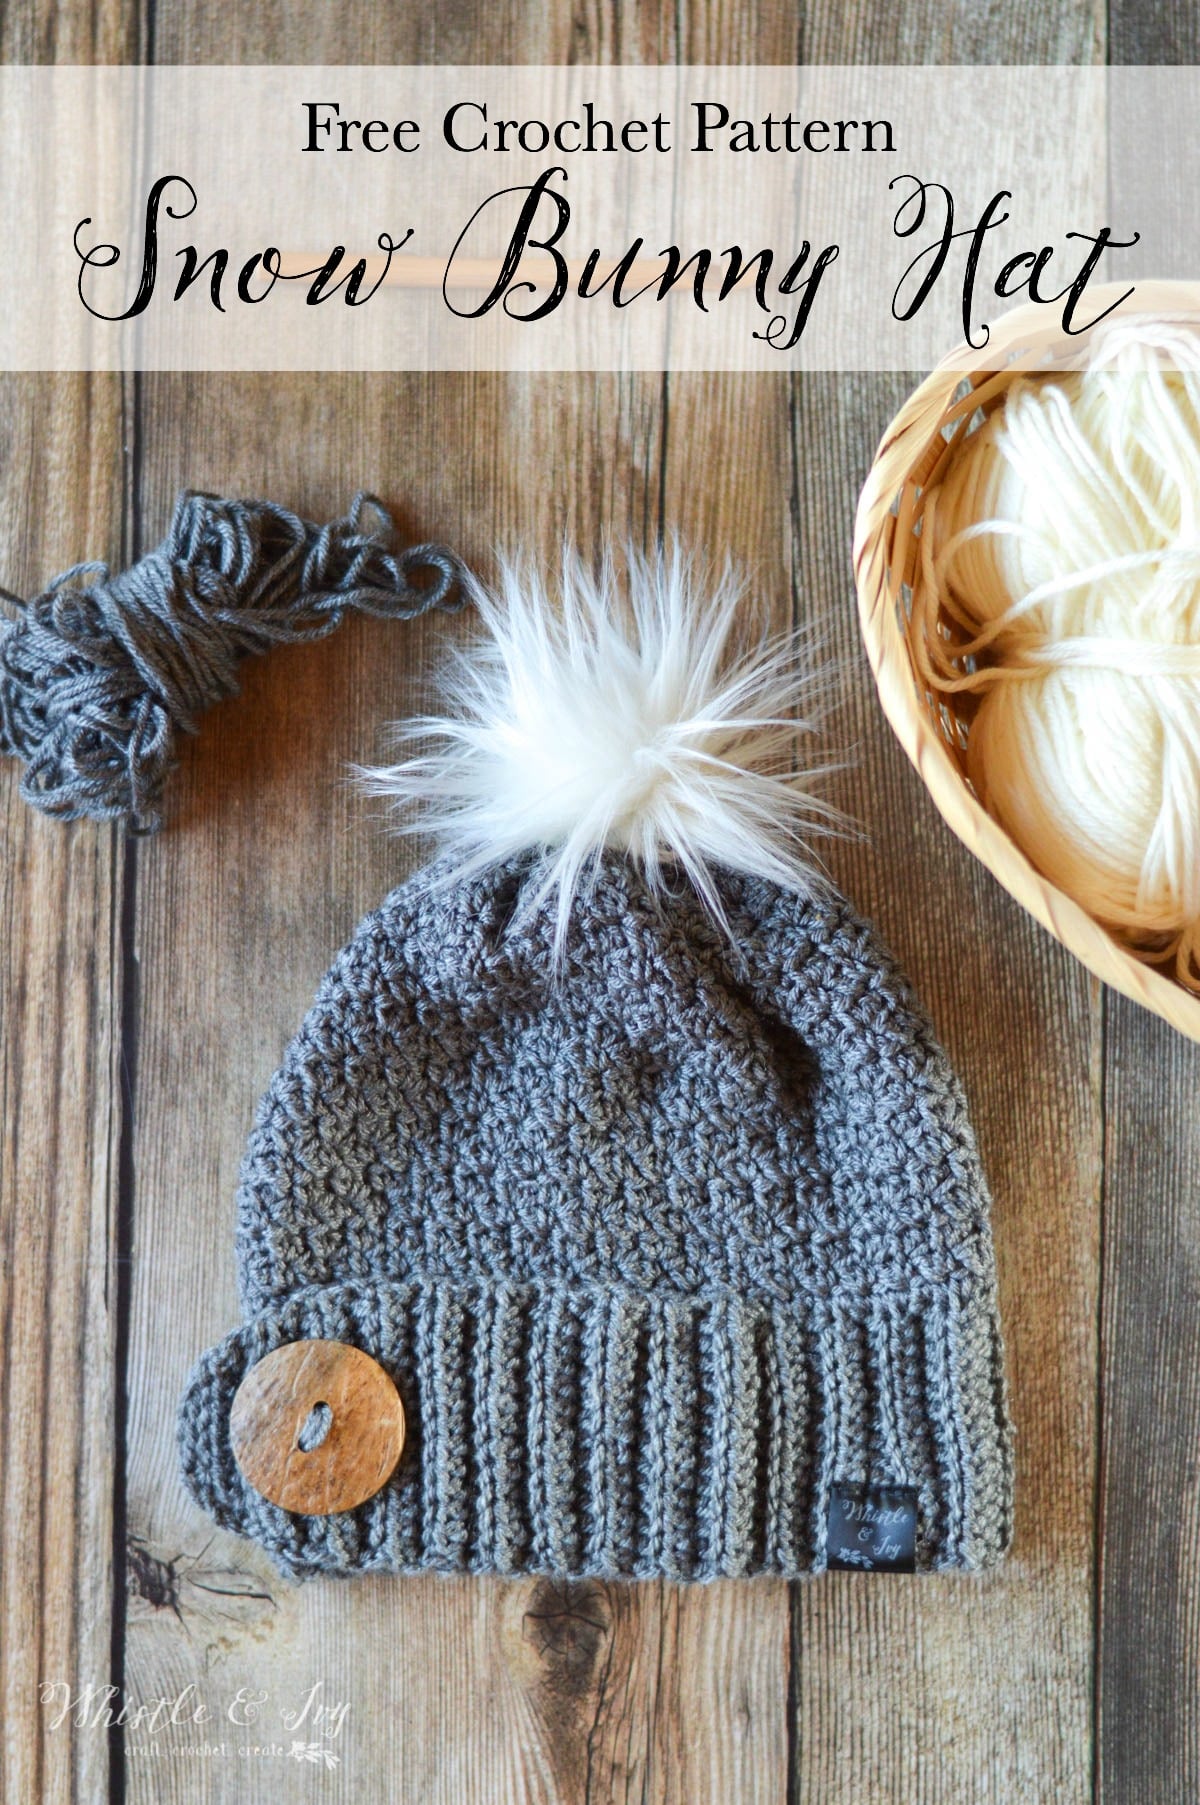 Crochet hat with large button and white fur pom-pom on top